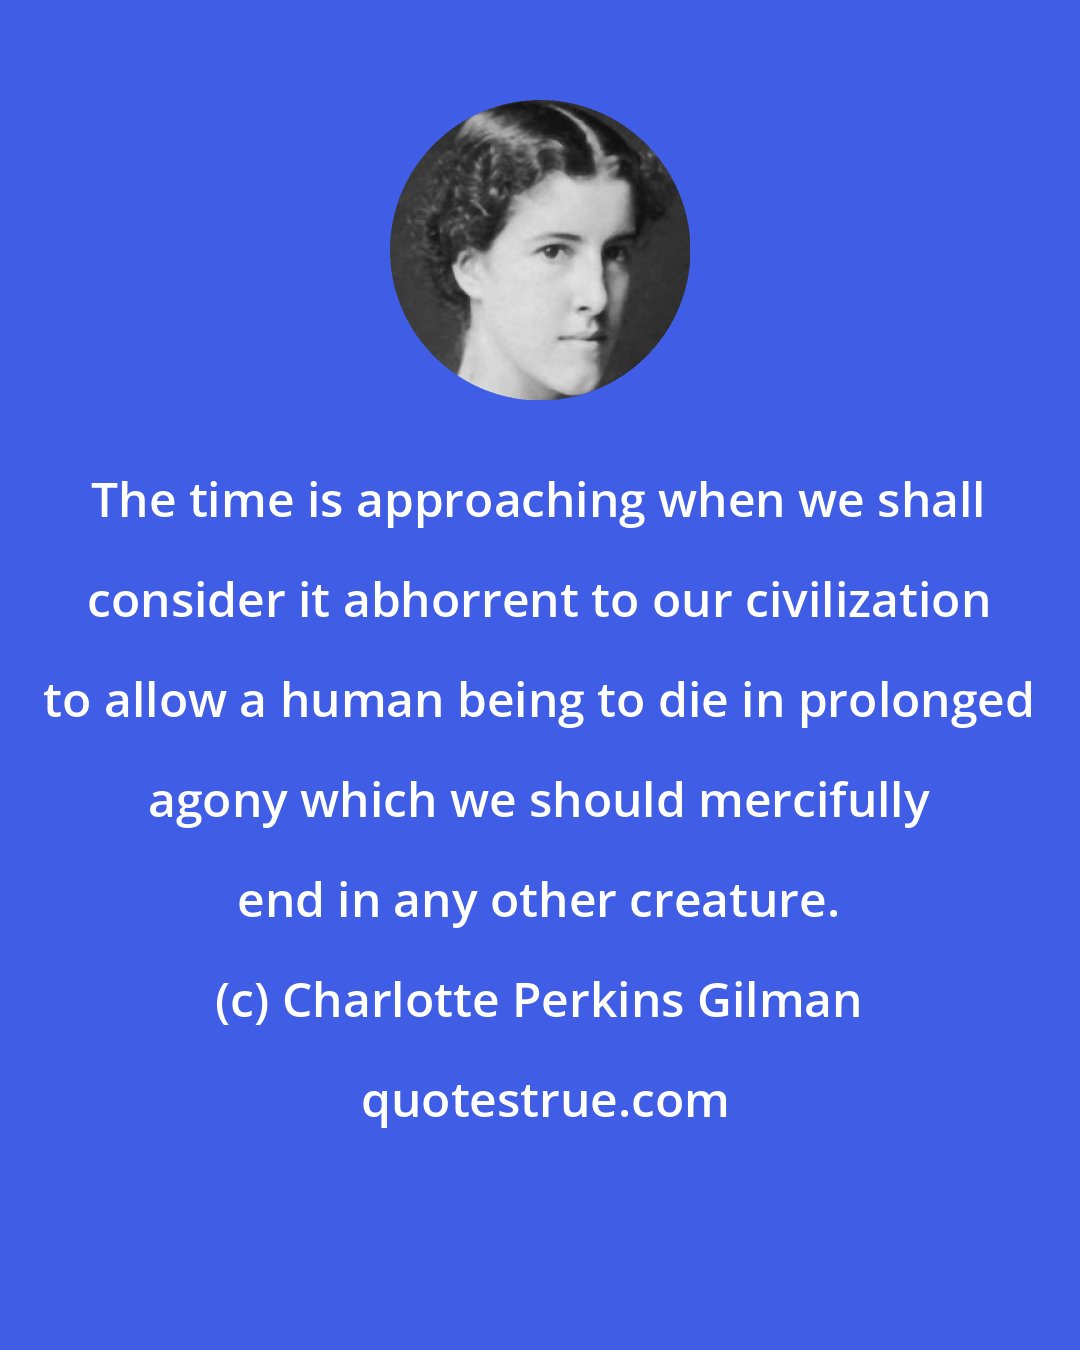 Charlotte Perkins Gilman: The time is approaching when we shall consider it abhorrent to our civilization to allow a human being to die in prolonged agony which we should mercifully end in any other creature.